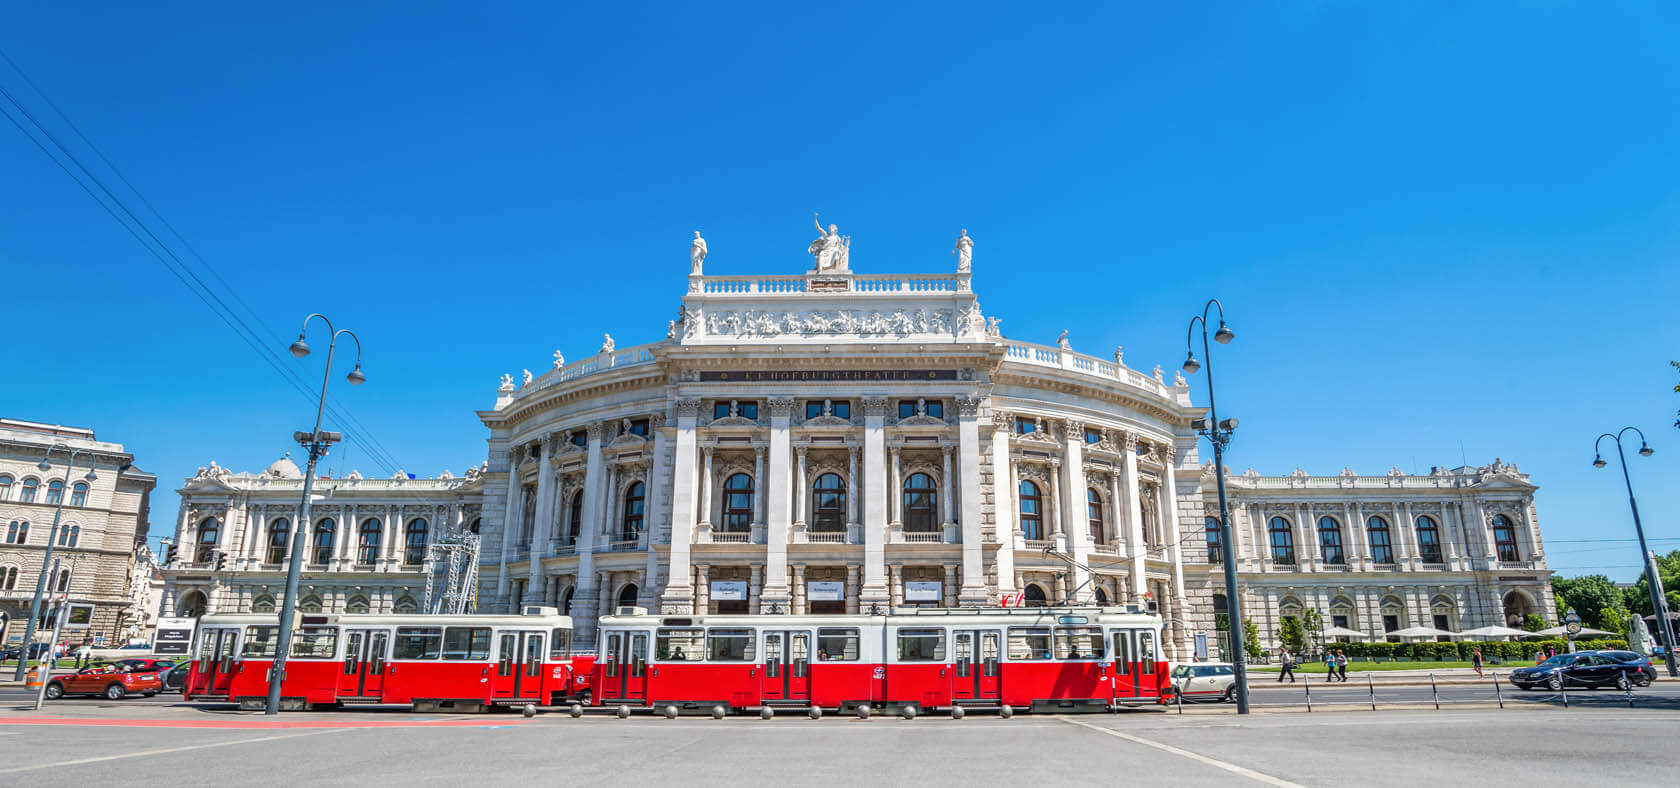 Vienna 3 day itinerary from locals - Vienna Book And Travel